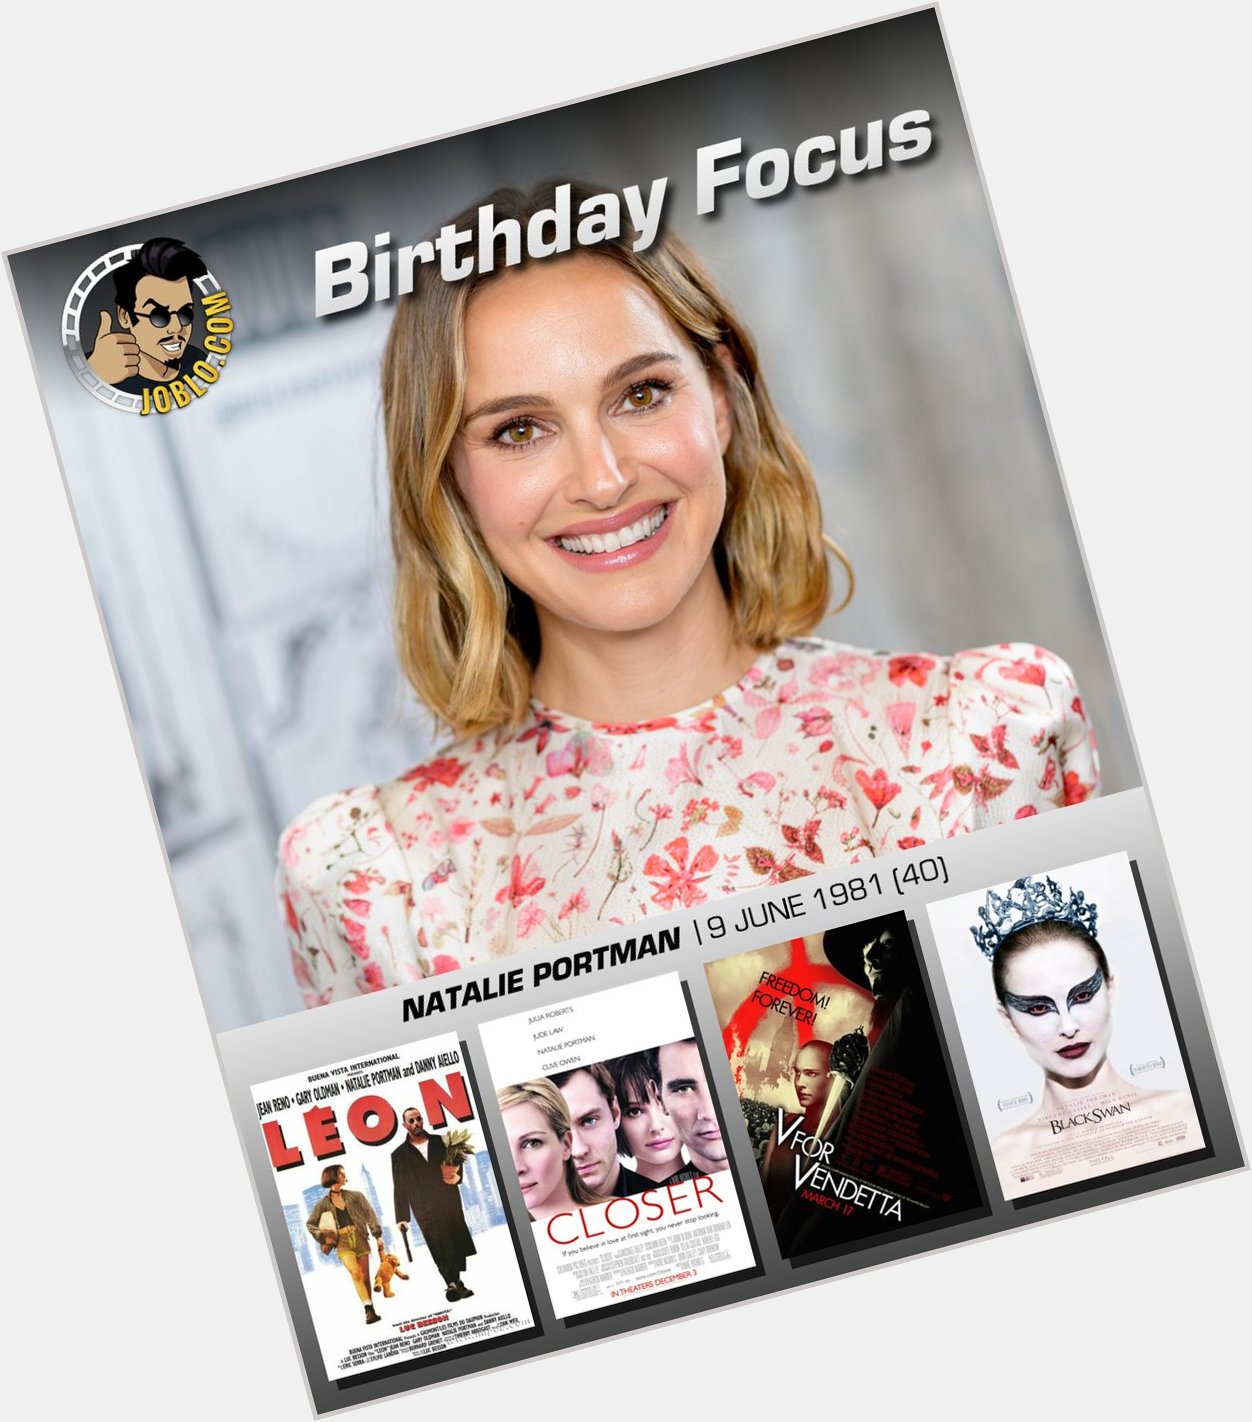 Wishing Natalie Portman a very happy 40th birthday!

What is your favorite performance of hers? 